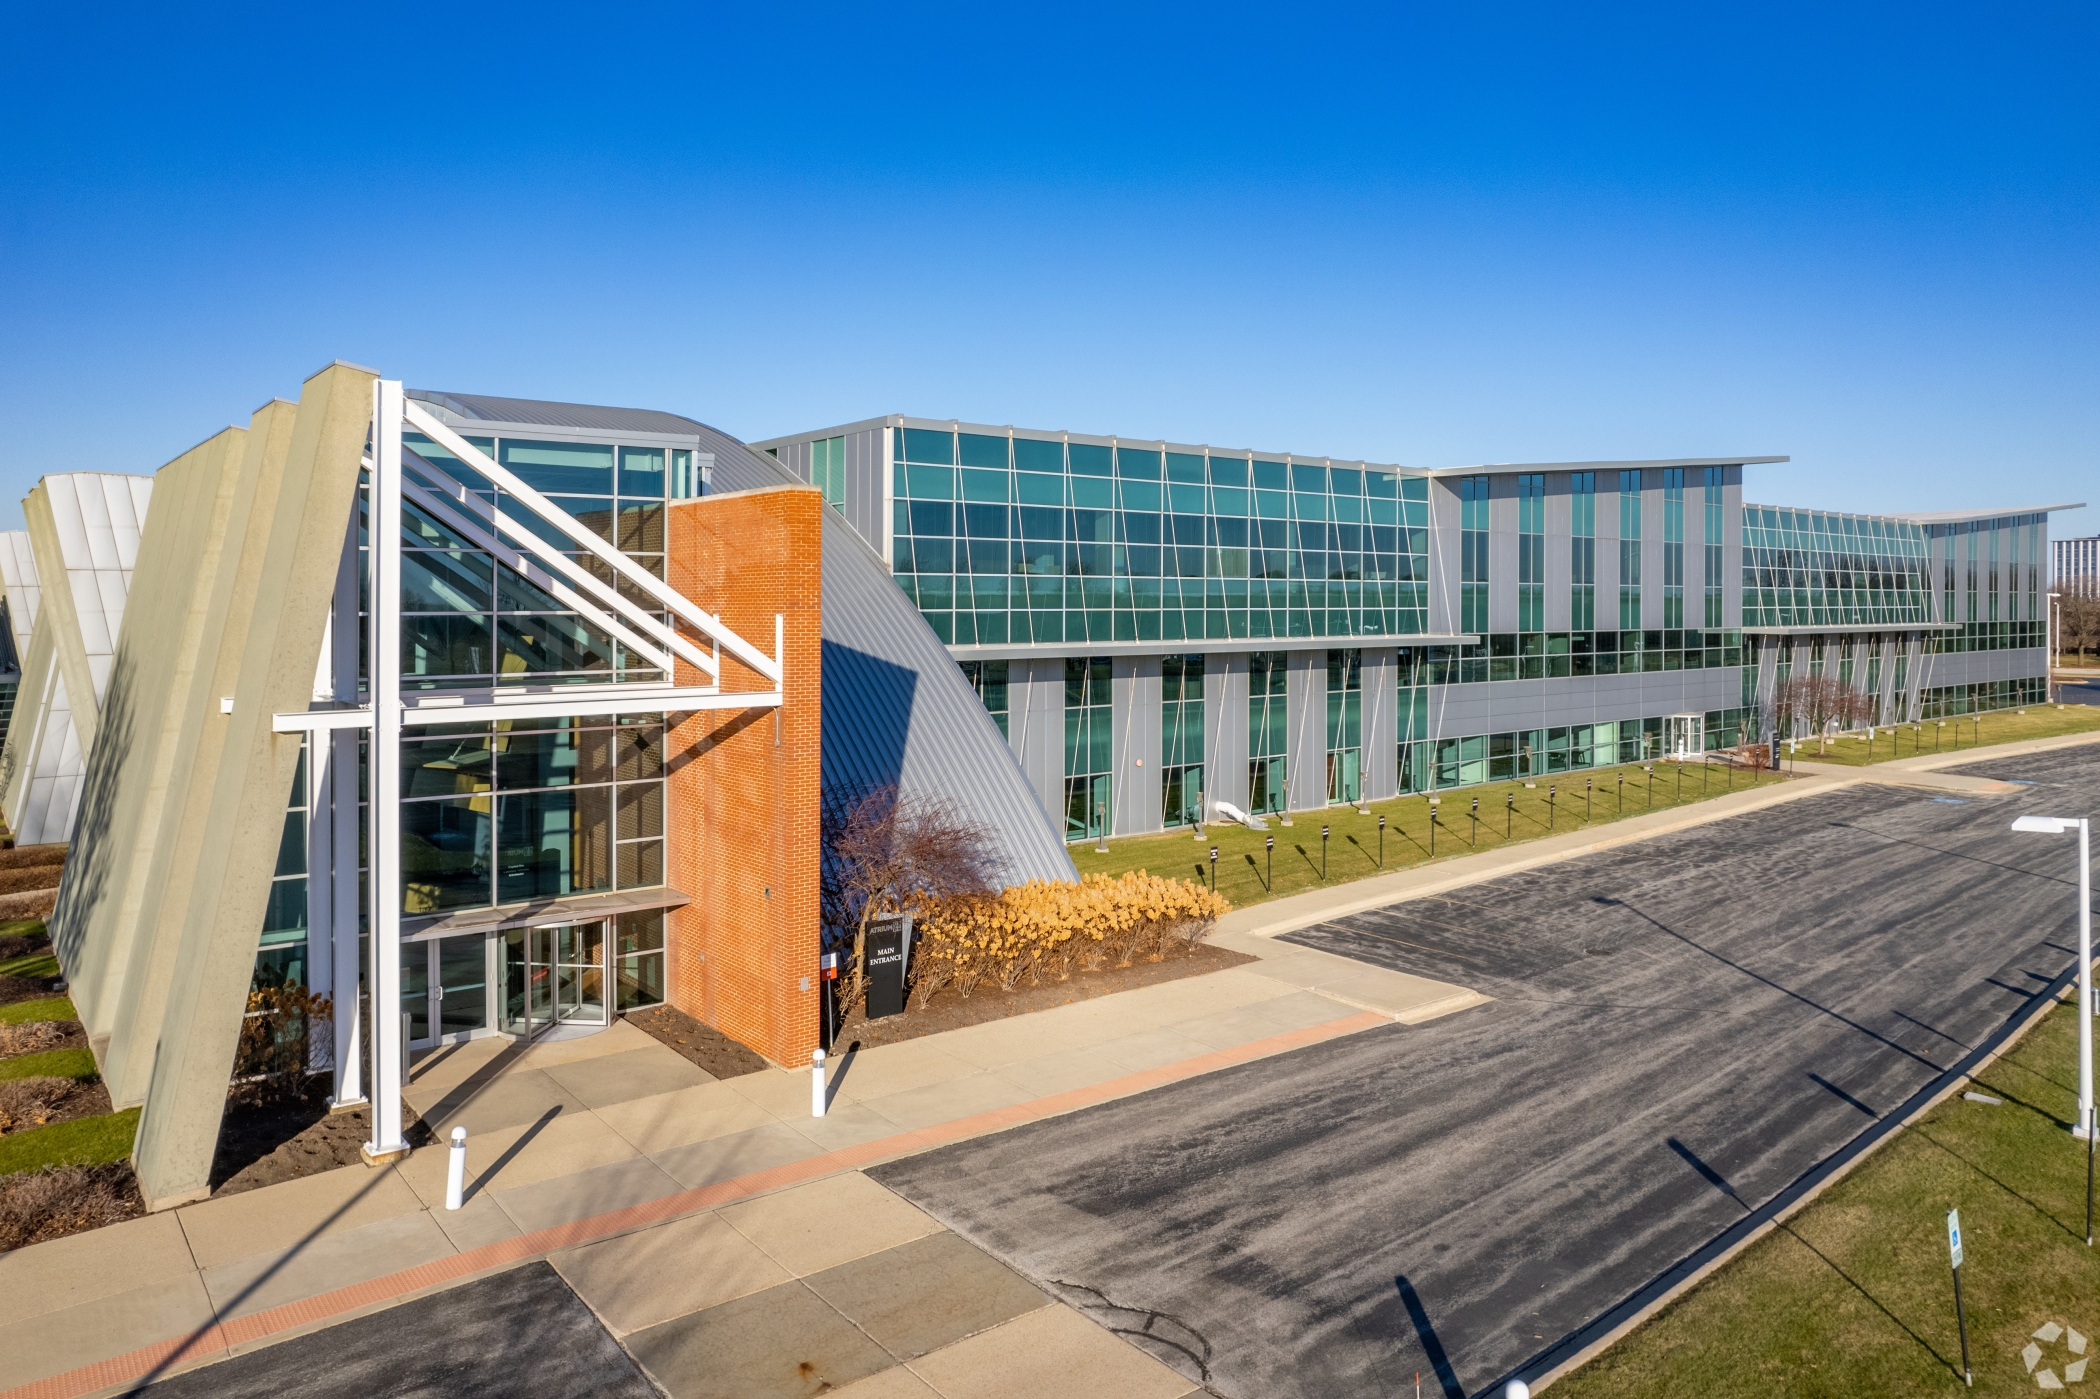 Brennan Investment Group has bought the Atrium, a three-story office building at 3800 Golf Road in Rolling Meadows, Illinois. It plans to eventually demolish the building for an industrial development on the 40-acre site. (Justin Schmidt/CoStar)